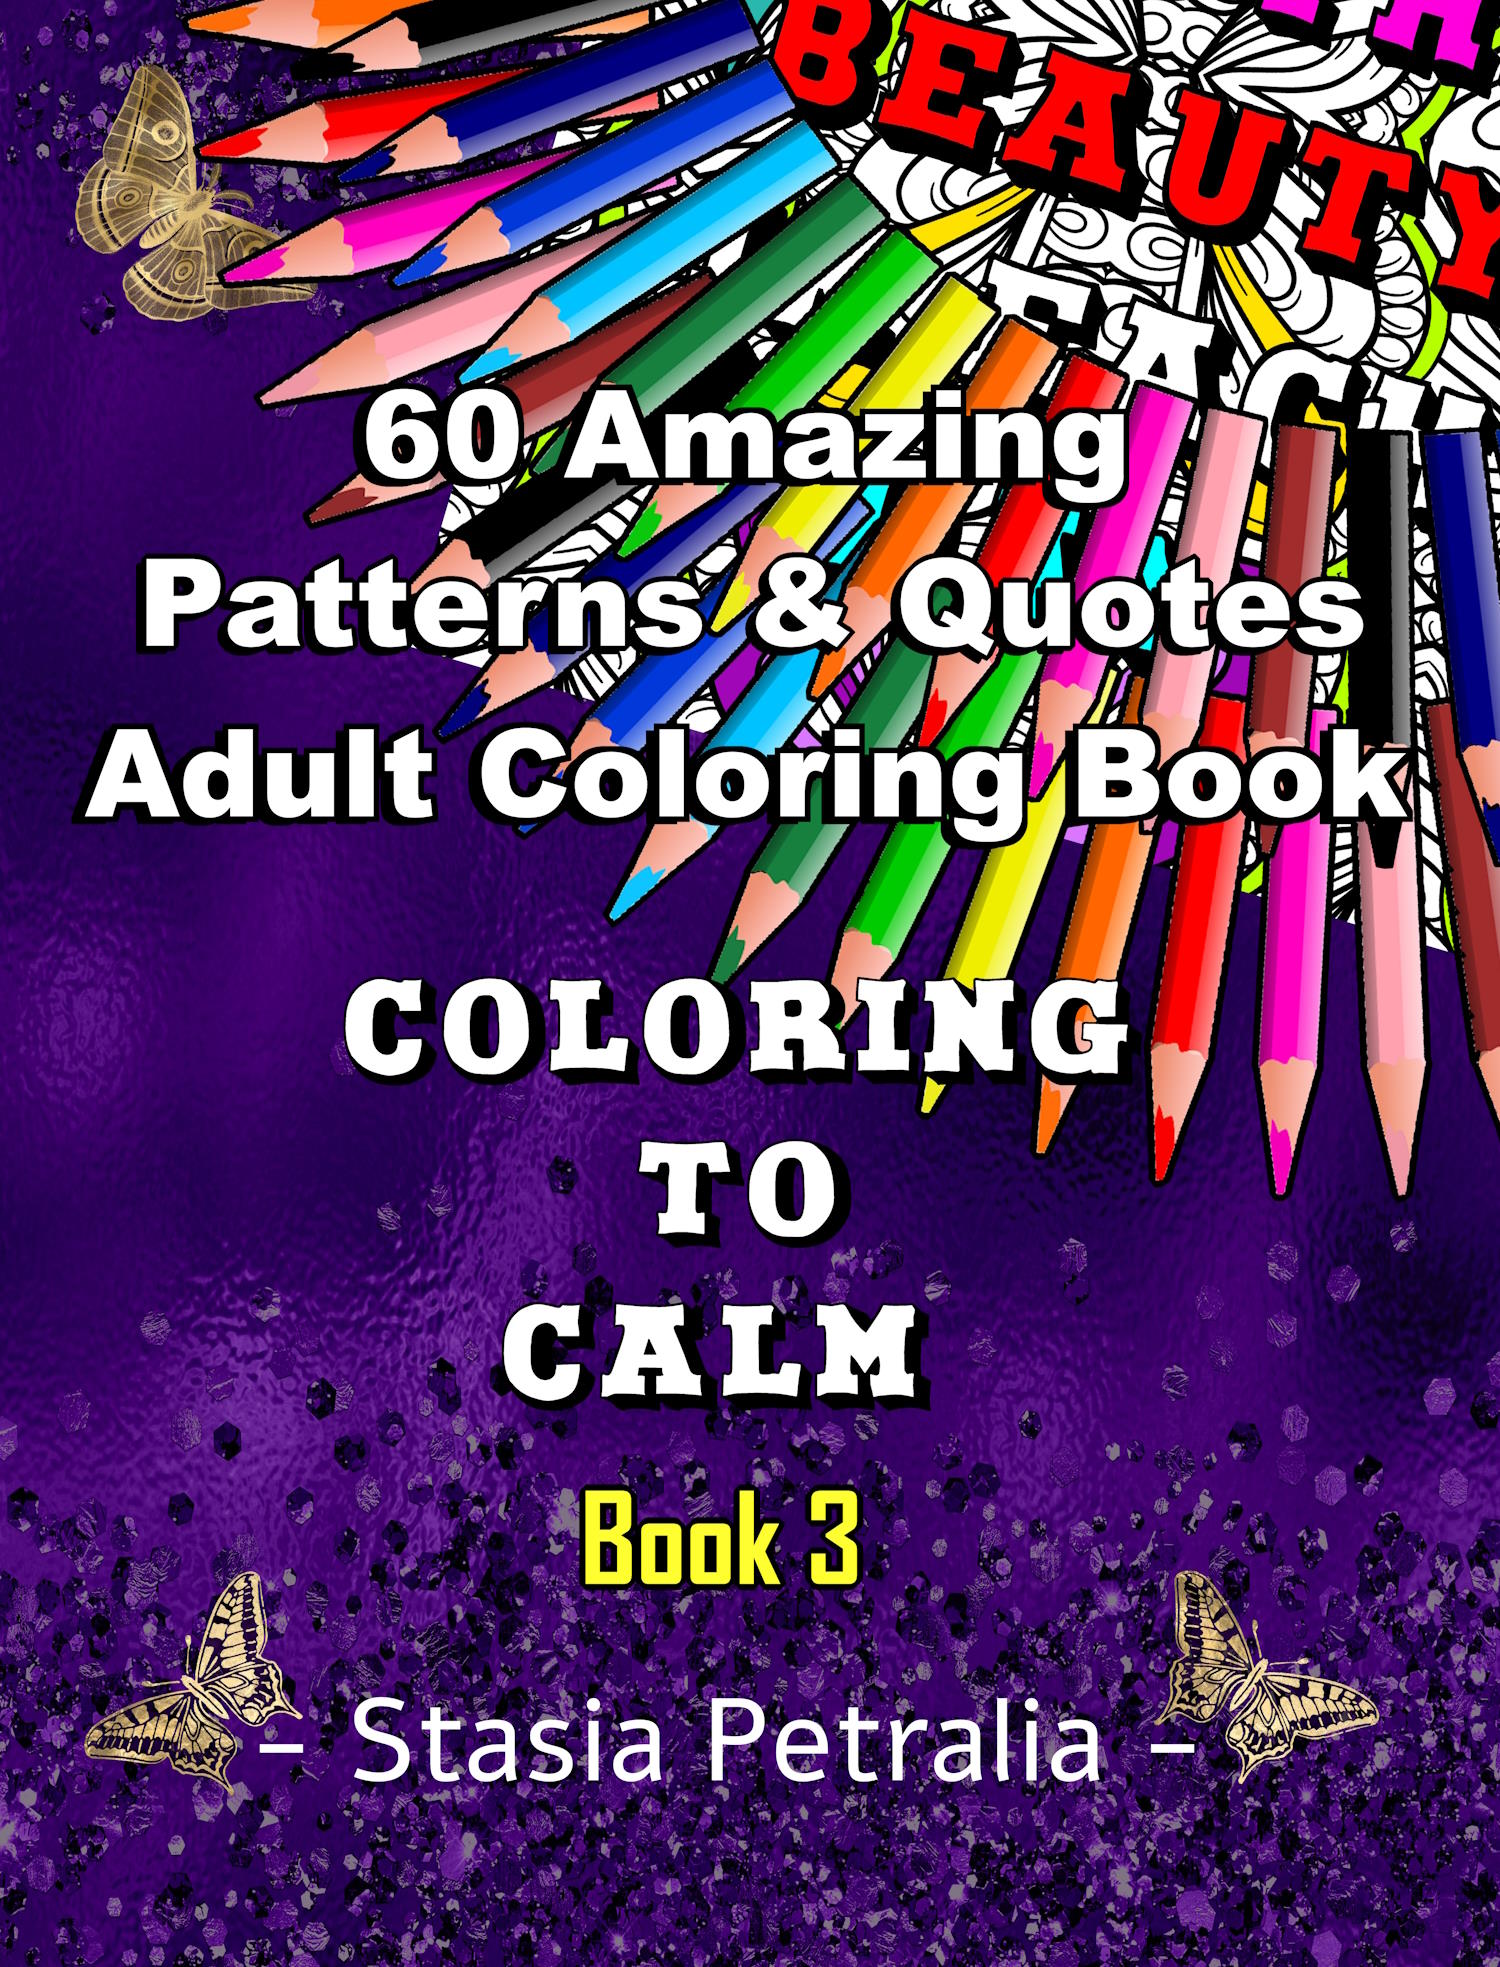 60 Amazing Patterns & Quotes Adult Coloring Book - Coloring to Calm Book 3 - An uplifting adult Coloring Book with beautiful Patterns and uplifting quotes for relaxation, stress relief and self love. By Stasia Petralia